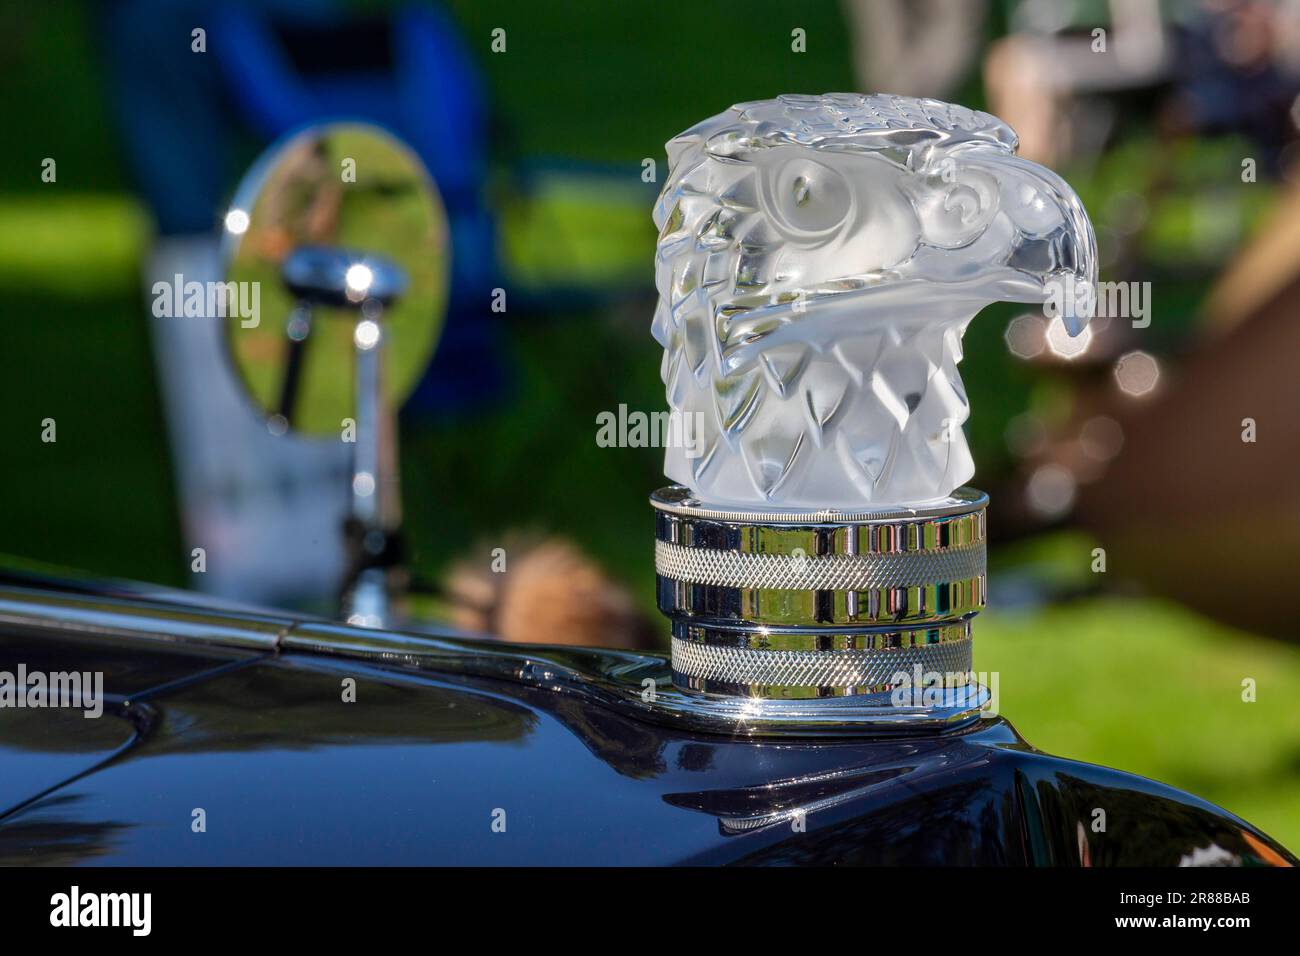 Grosse Pointe Shores, Michigan, The hood ornament of a 1938 Packard Super 8 sedan at the Eyes on Design auto show. This year's show featured Stock Photo